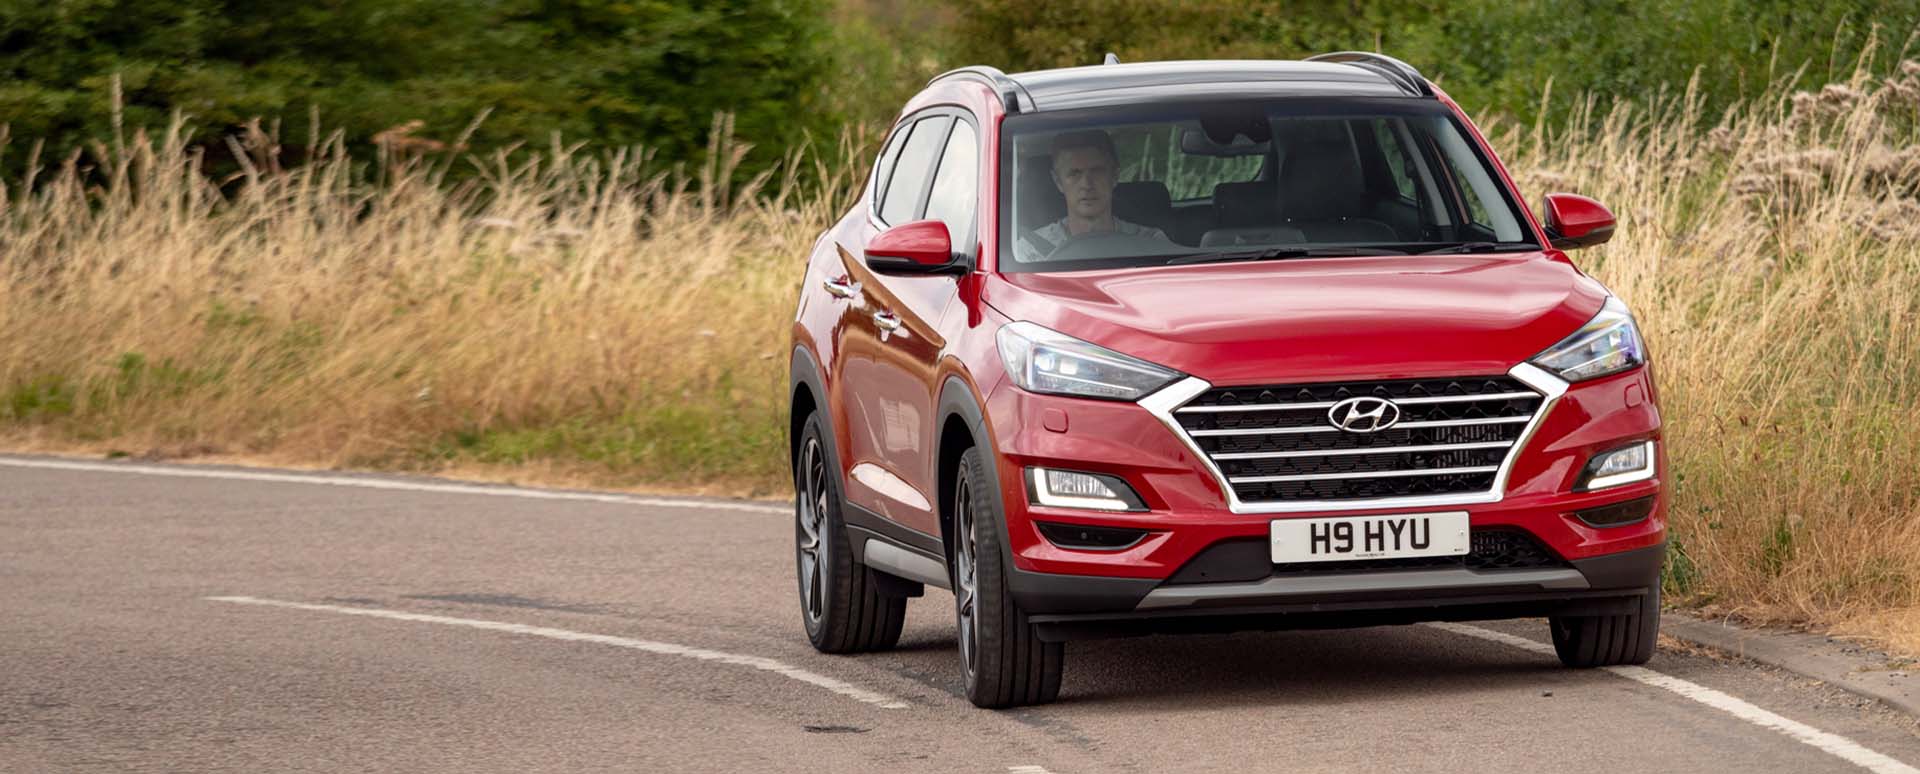 Red Hyundai Tucson driving in the countryside